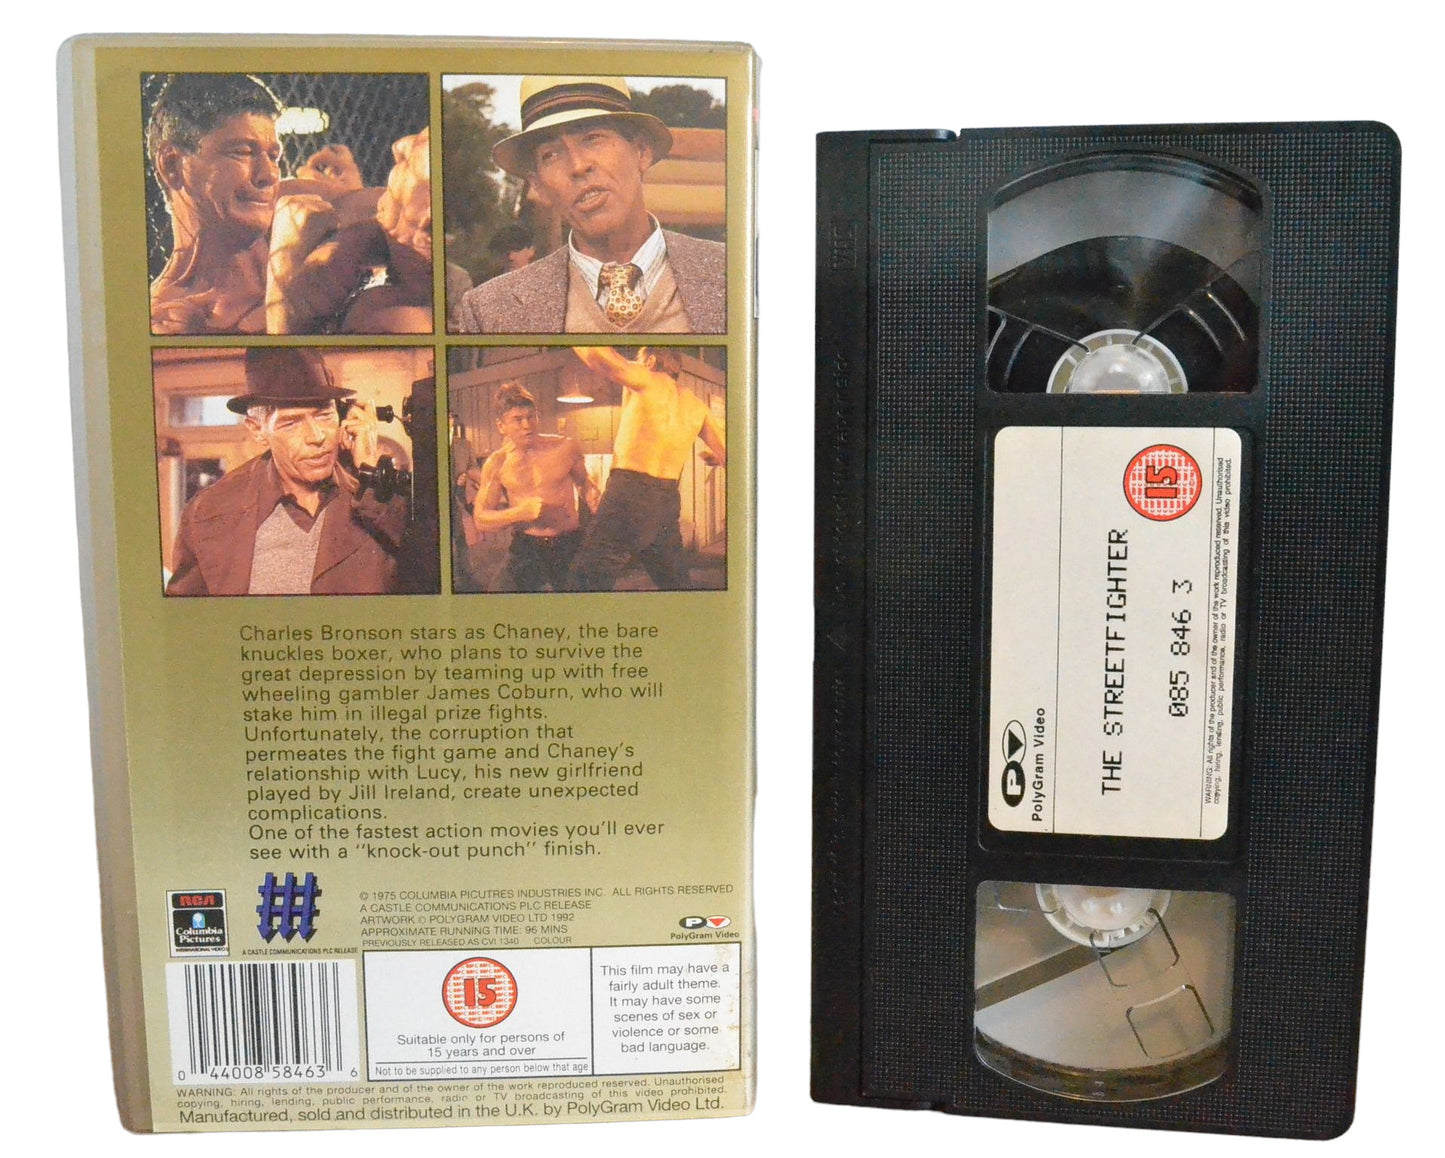 The Street Fighter - Charles Bronson - PolyGram Video - 858463 - Action - Pal - VHS-